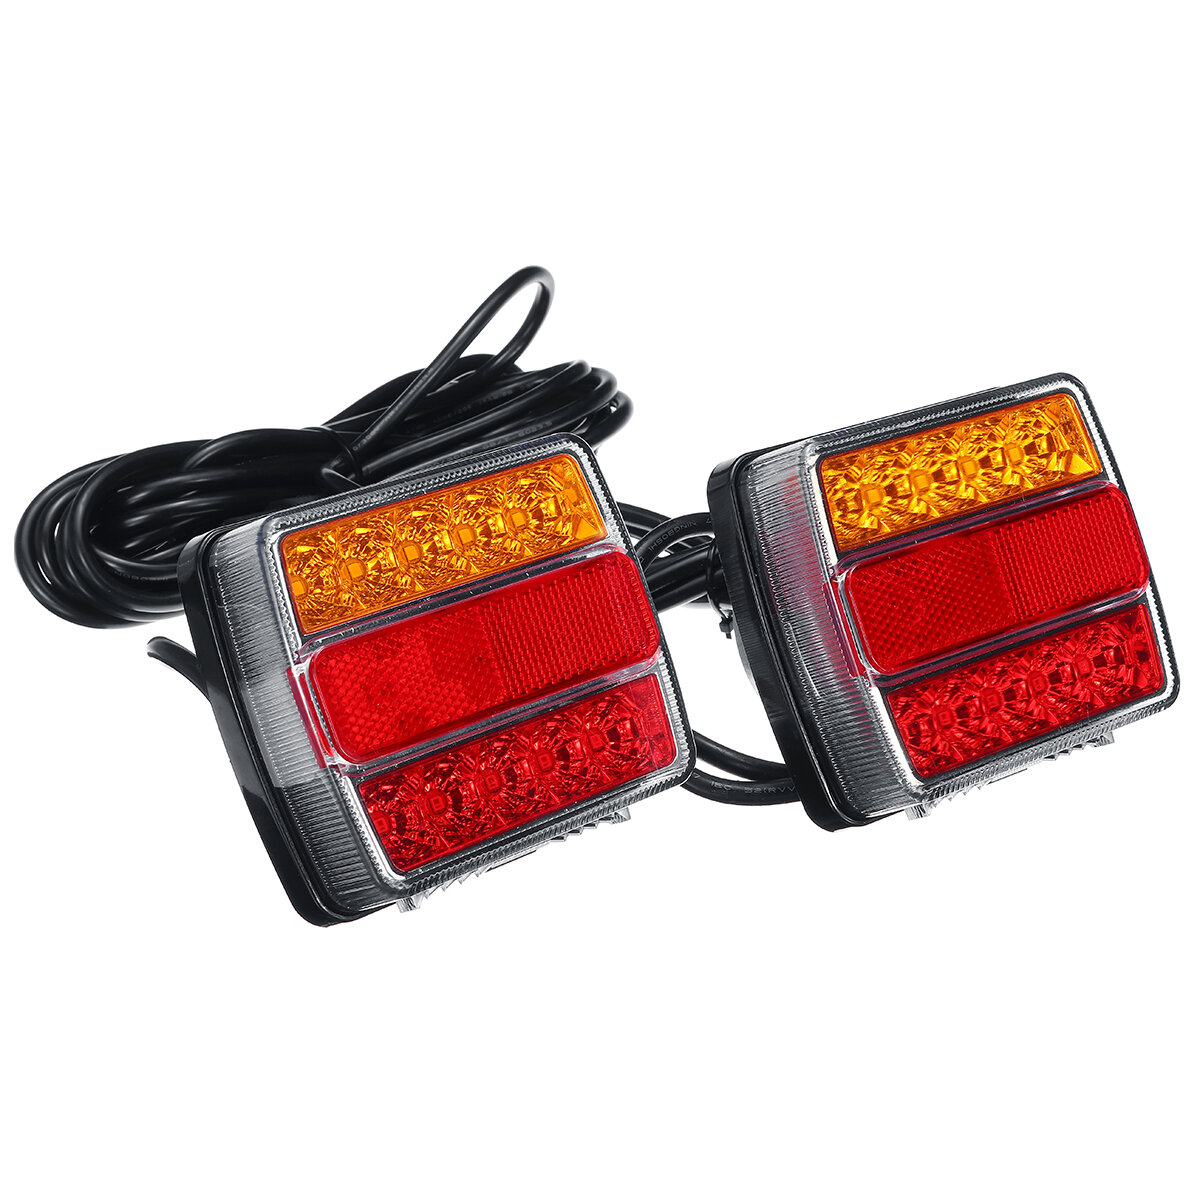 Image of 12V 2pcs Magnetic Trailer Tail Lights Stop Indicator License Plate Lamp Waterproof 16 LED